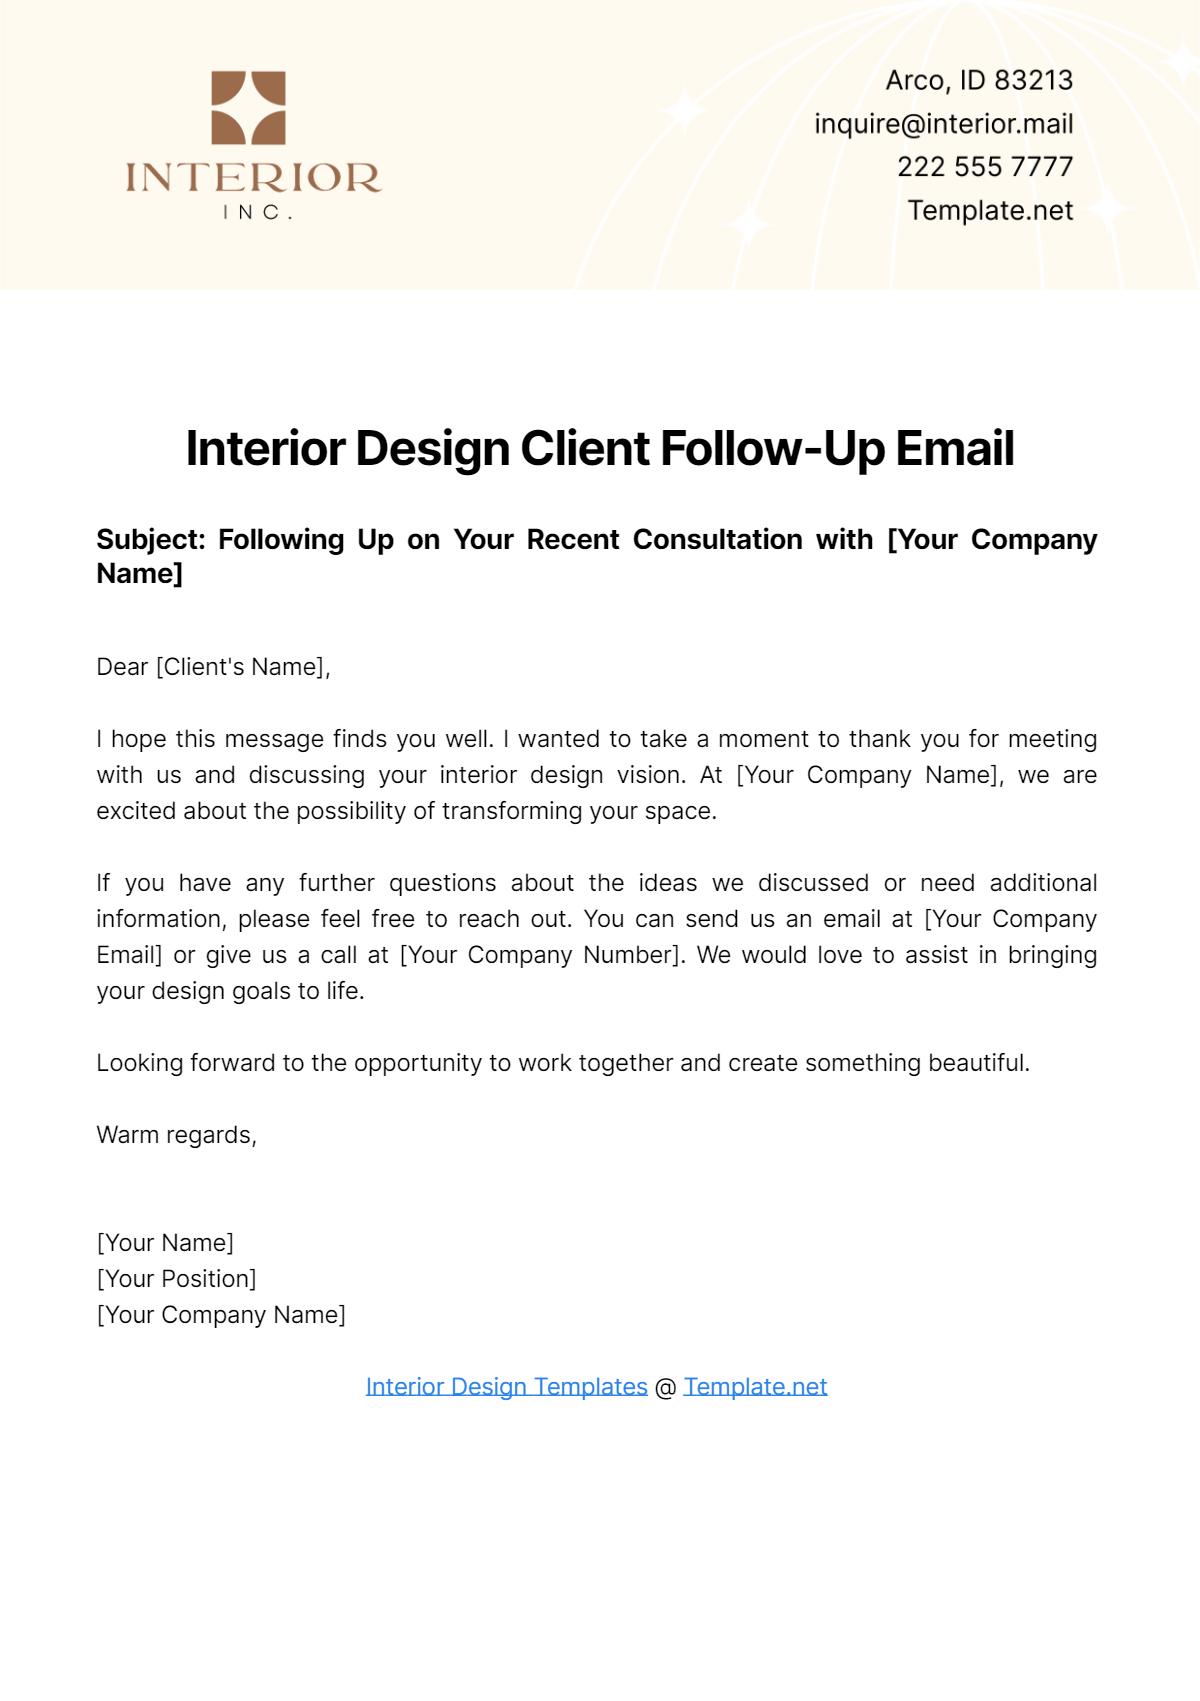 Free Interior Design Client Follow-Up Email Template